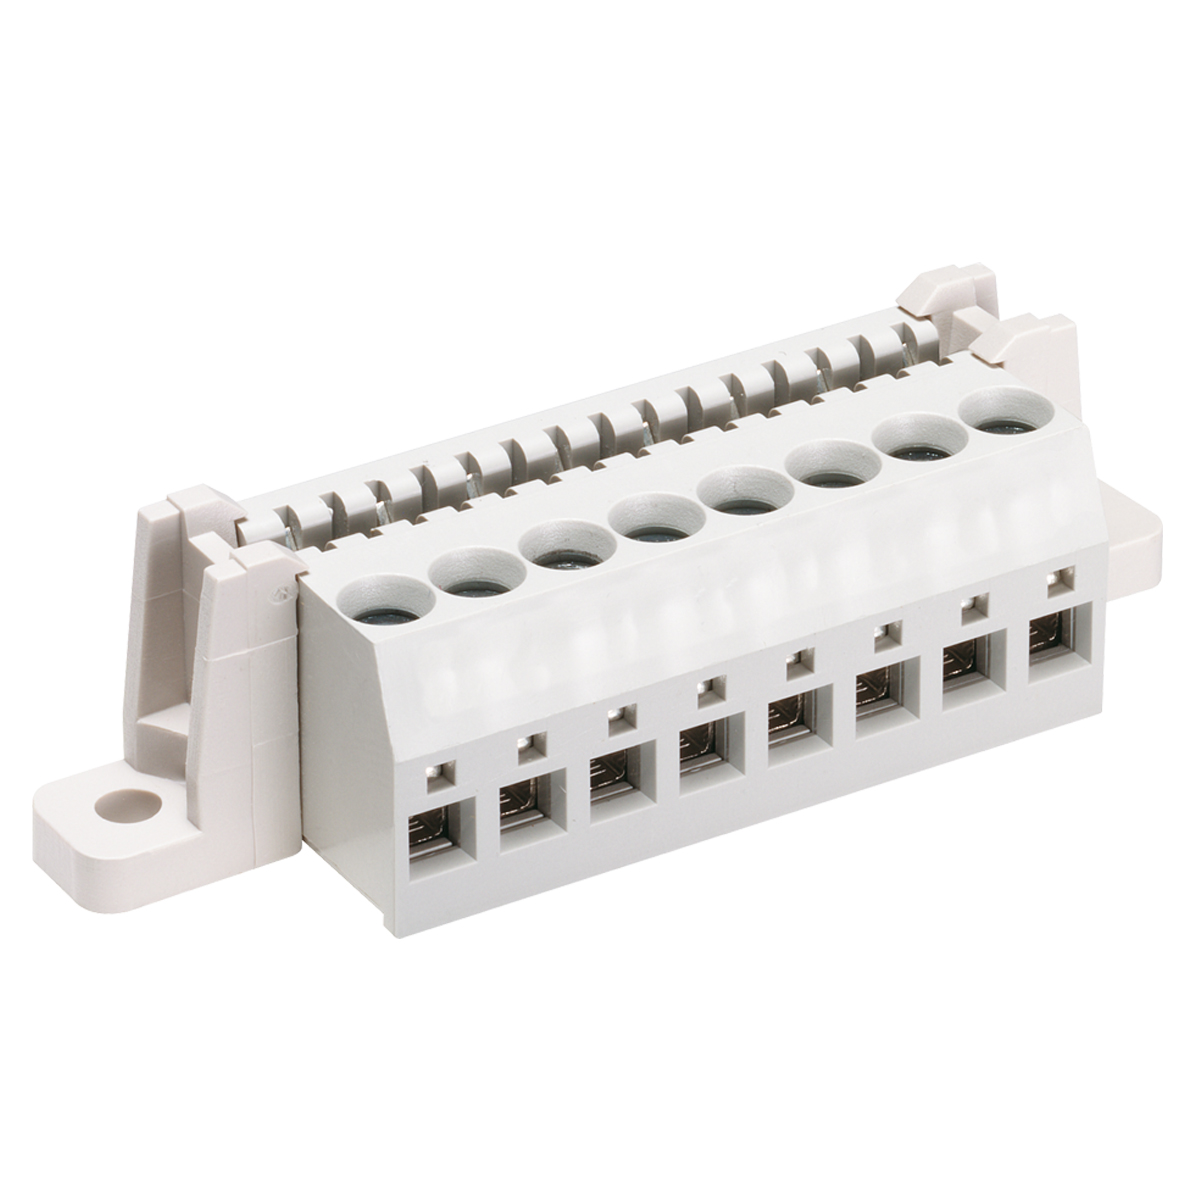 Lumberg: 5 RS FK (Series 52 | Direct connectors with screw clamps, for insert cards, pitch 5.0 mm)